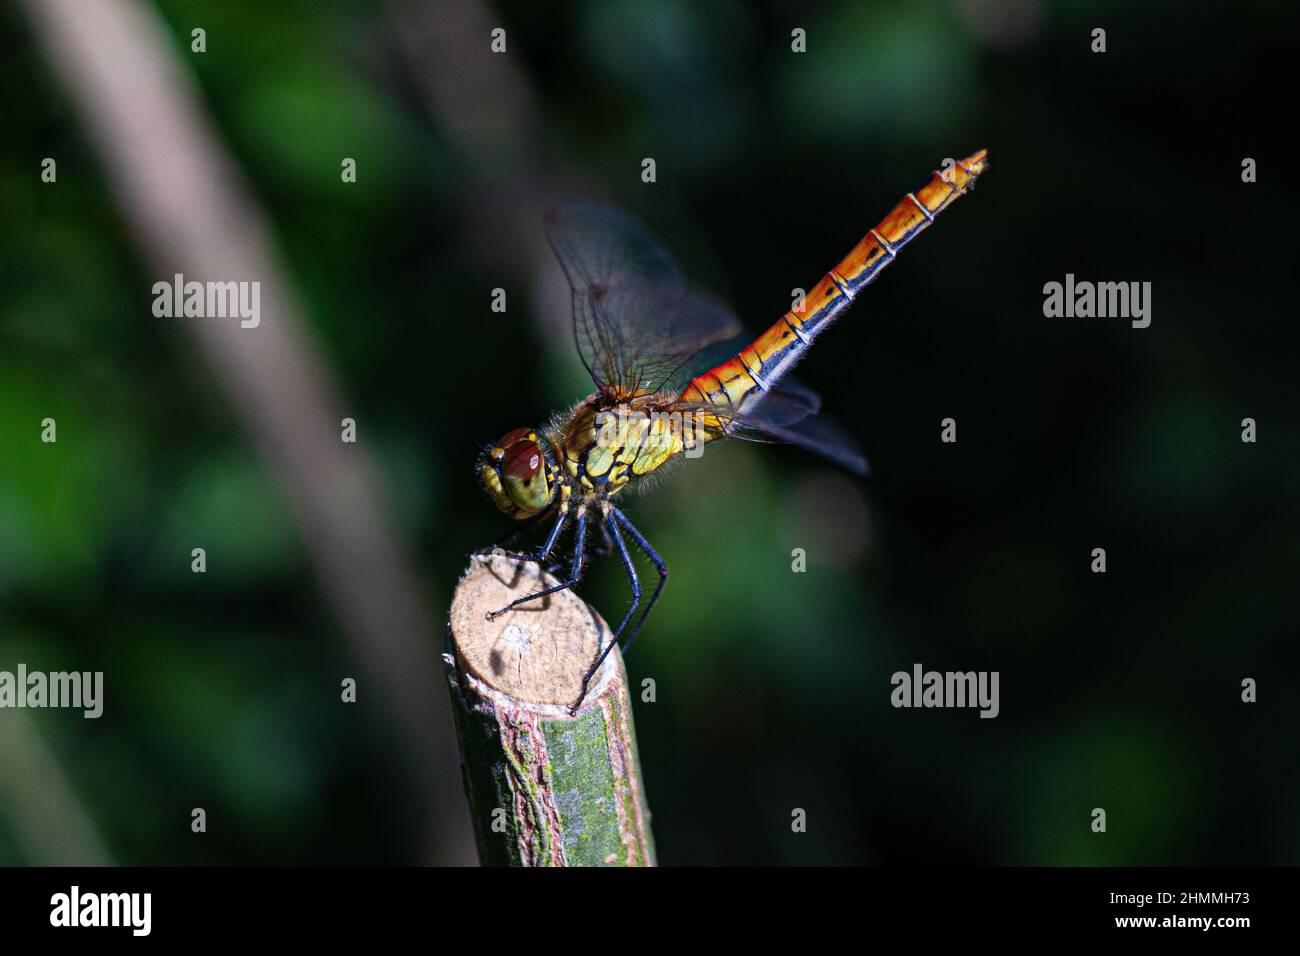 Close-up image of a dragonfly (libelle, libellule) resting on the tip of a plant  in the garden while it's sunny outside. Wings are still in motion. Stock Photo